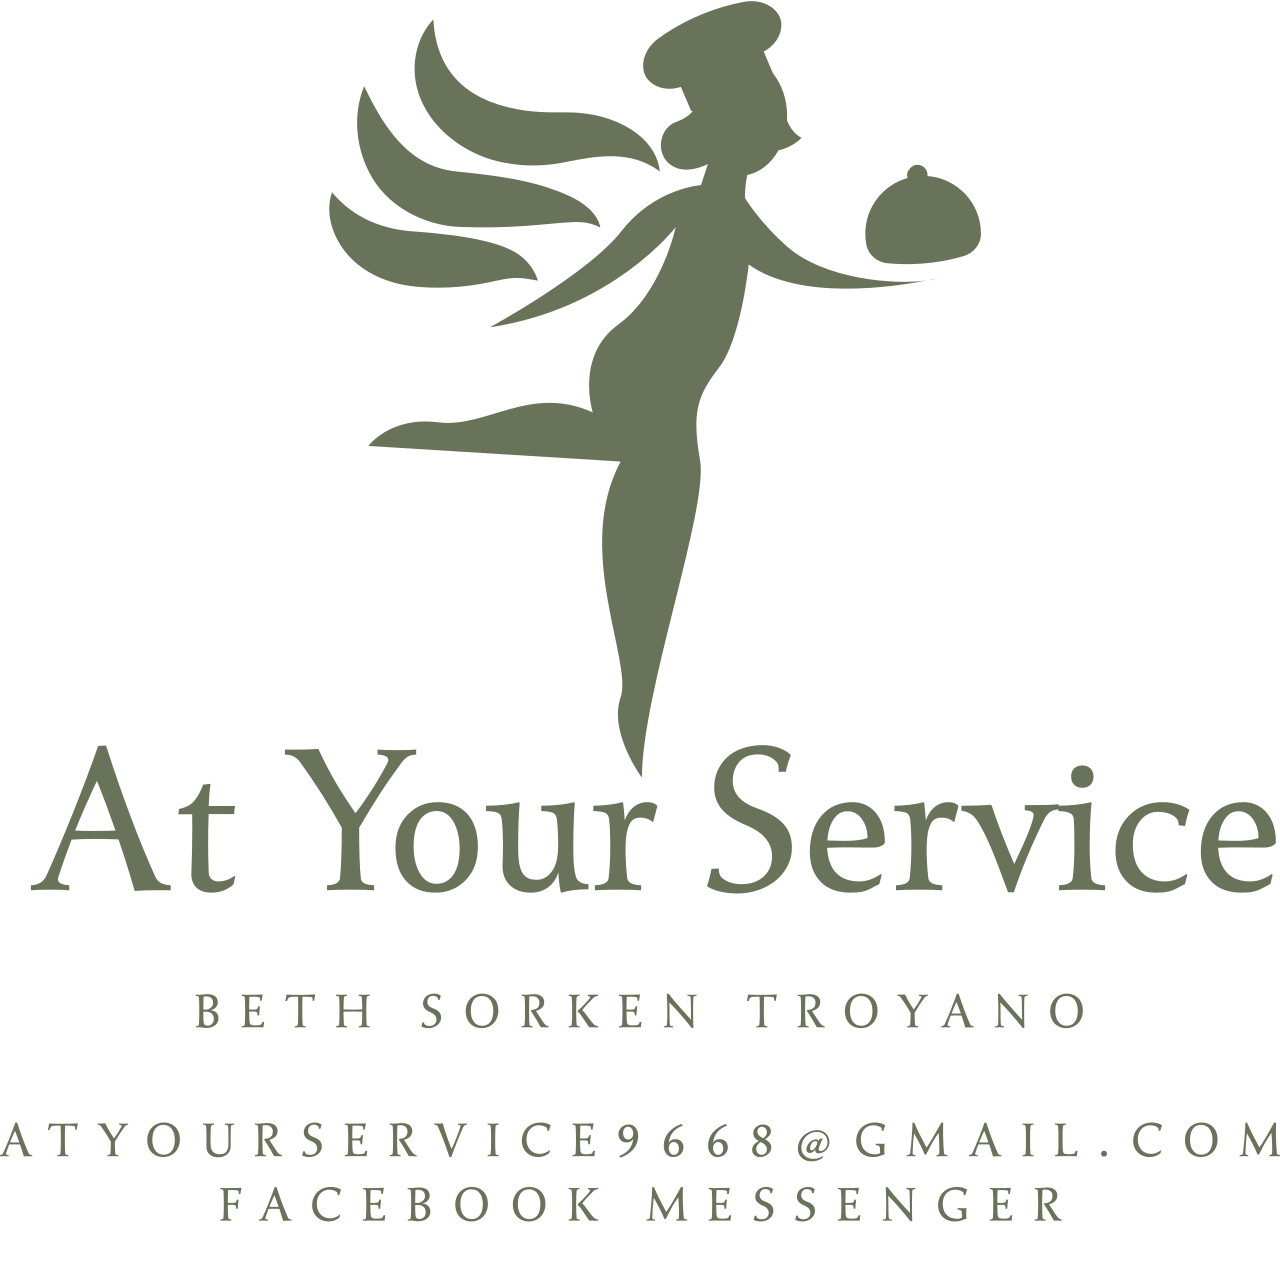 At Your Service's logo